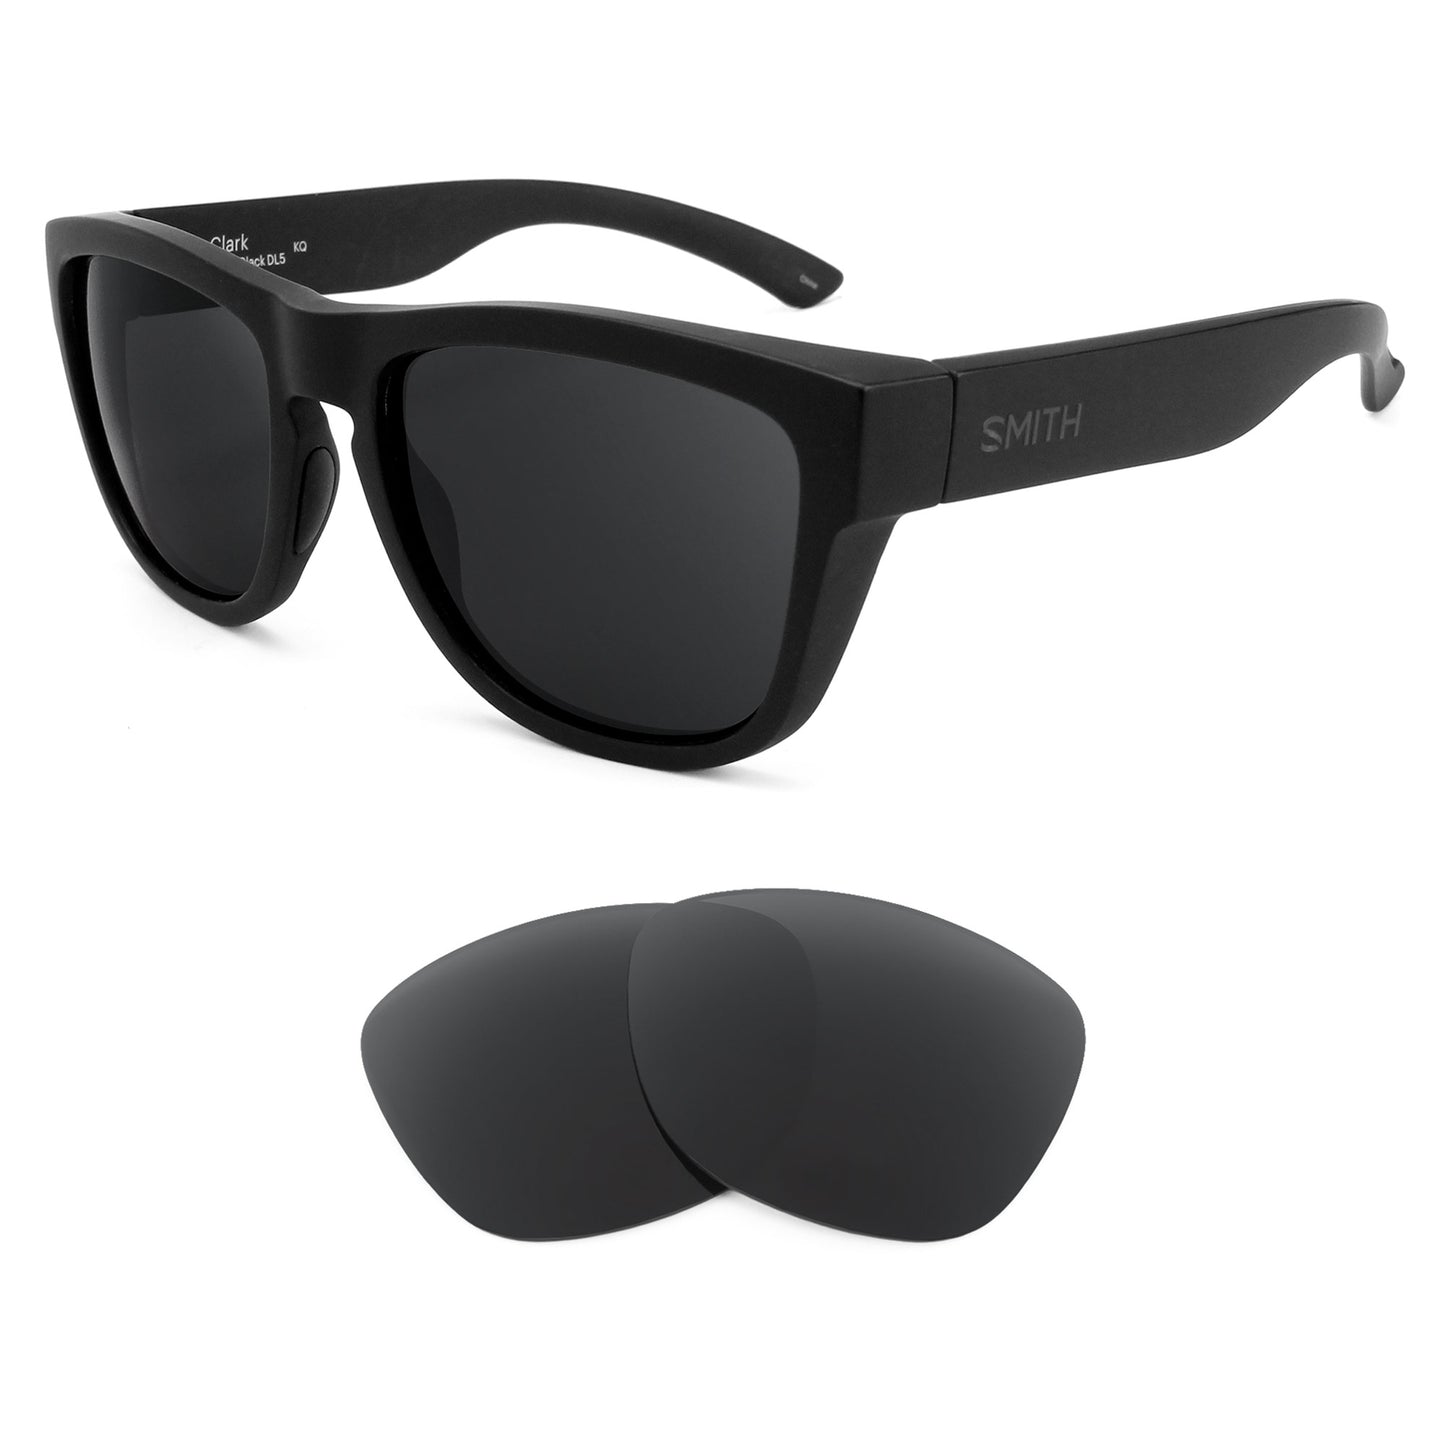 Smith Clark sunglasses with replacement lenses